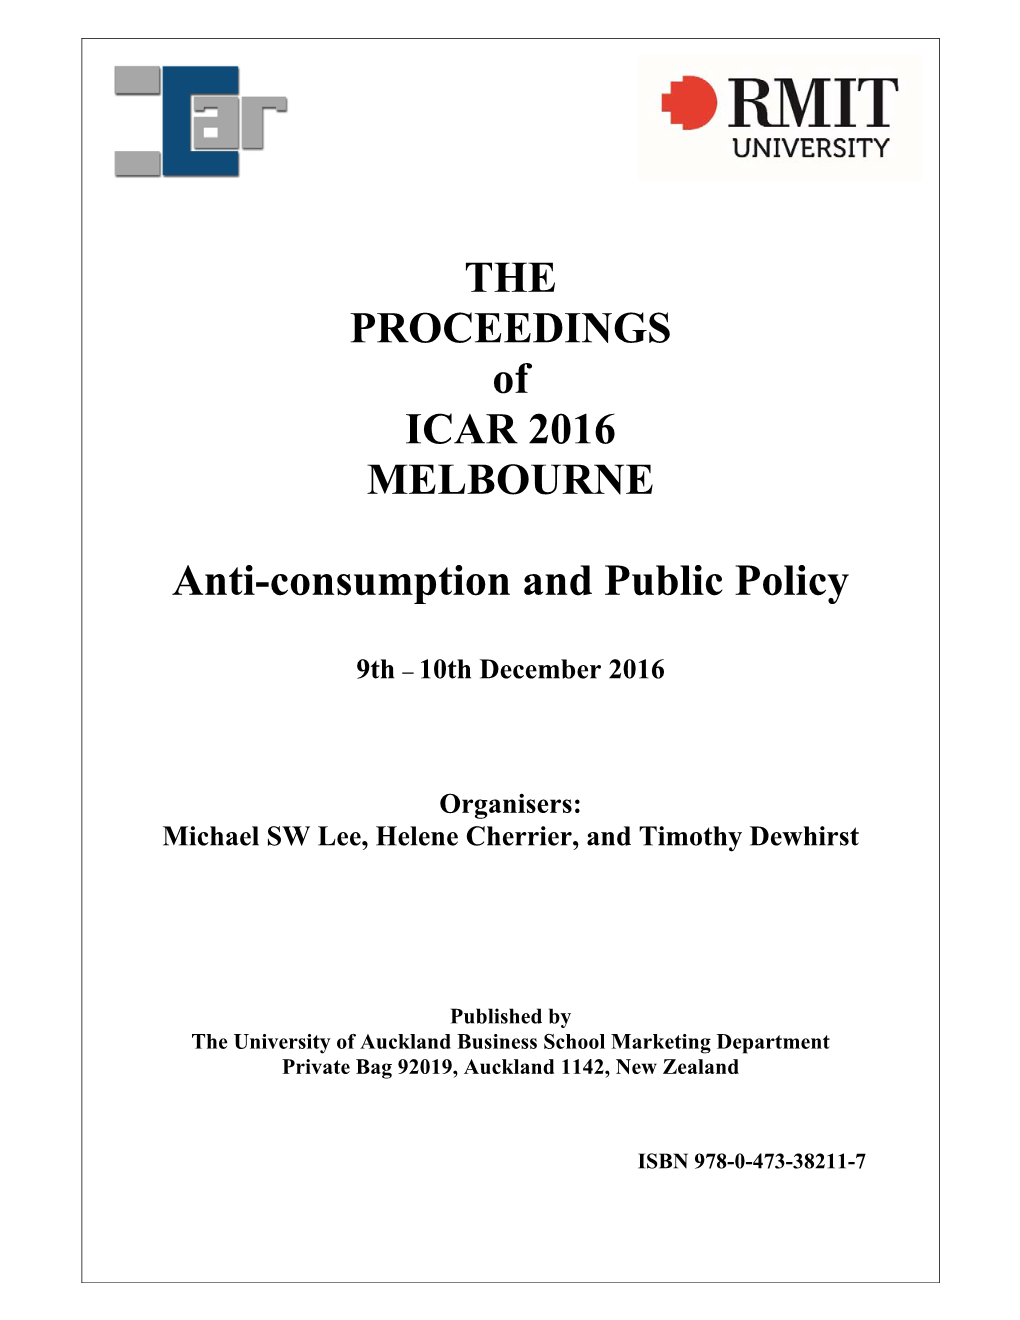 THE PROCEEDINGS of ICAR 2016 MELBOURNE Anti-Consumption